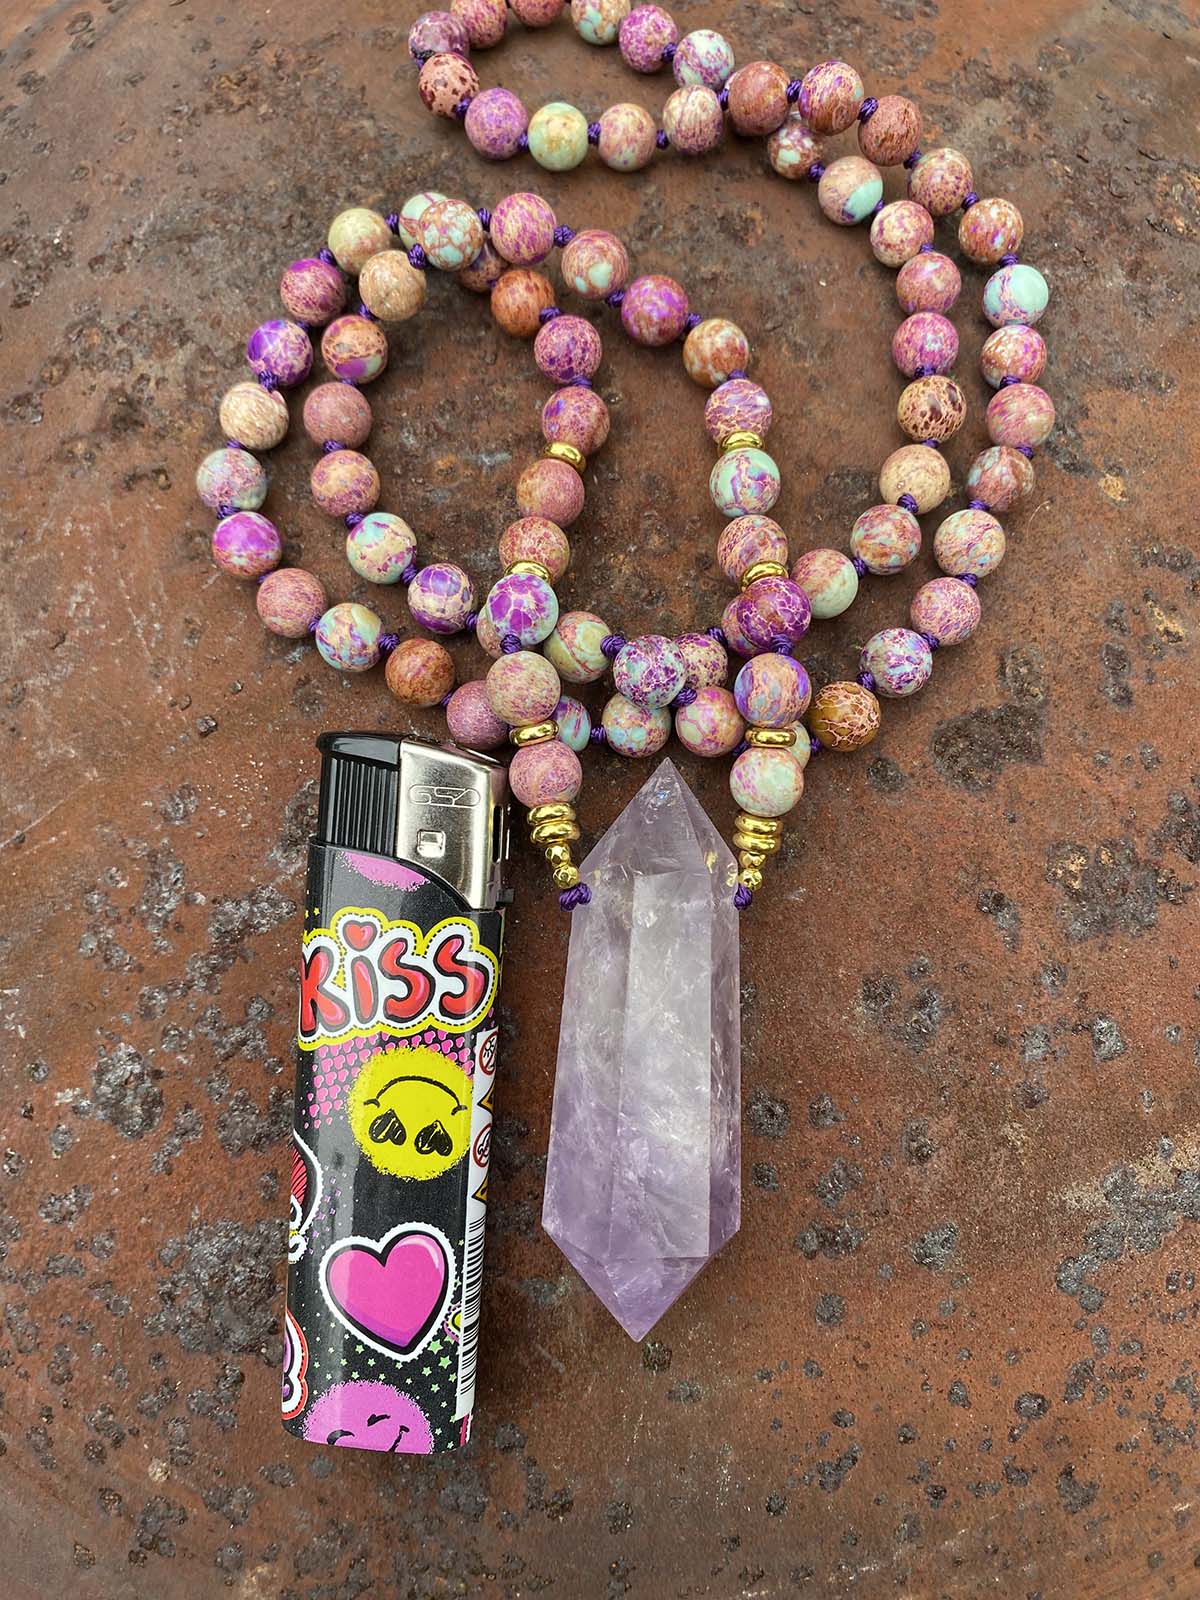 Sea Sediment Jasper with Amethyst point stone necklace 